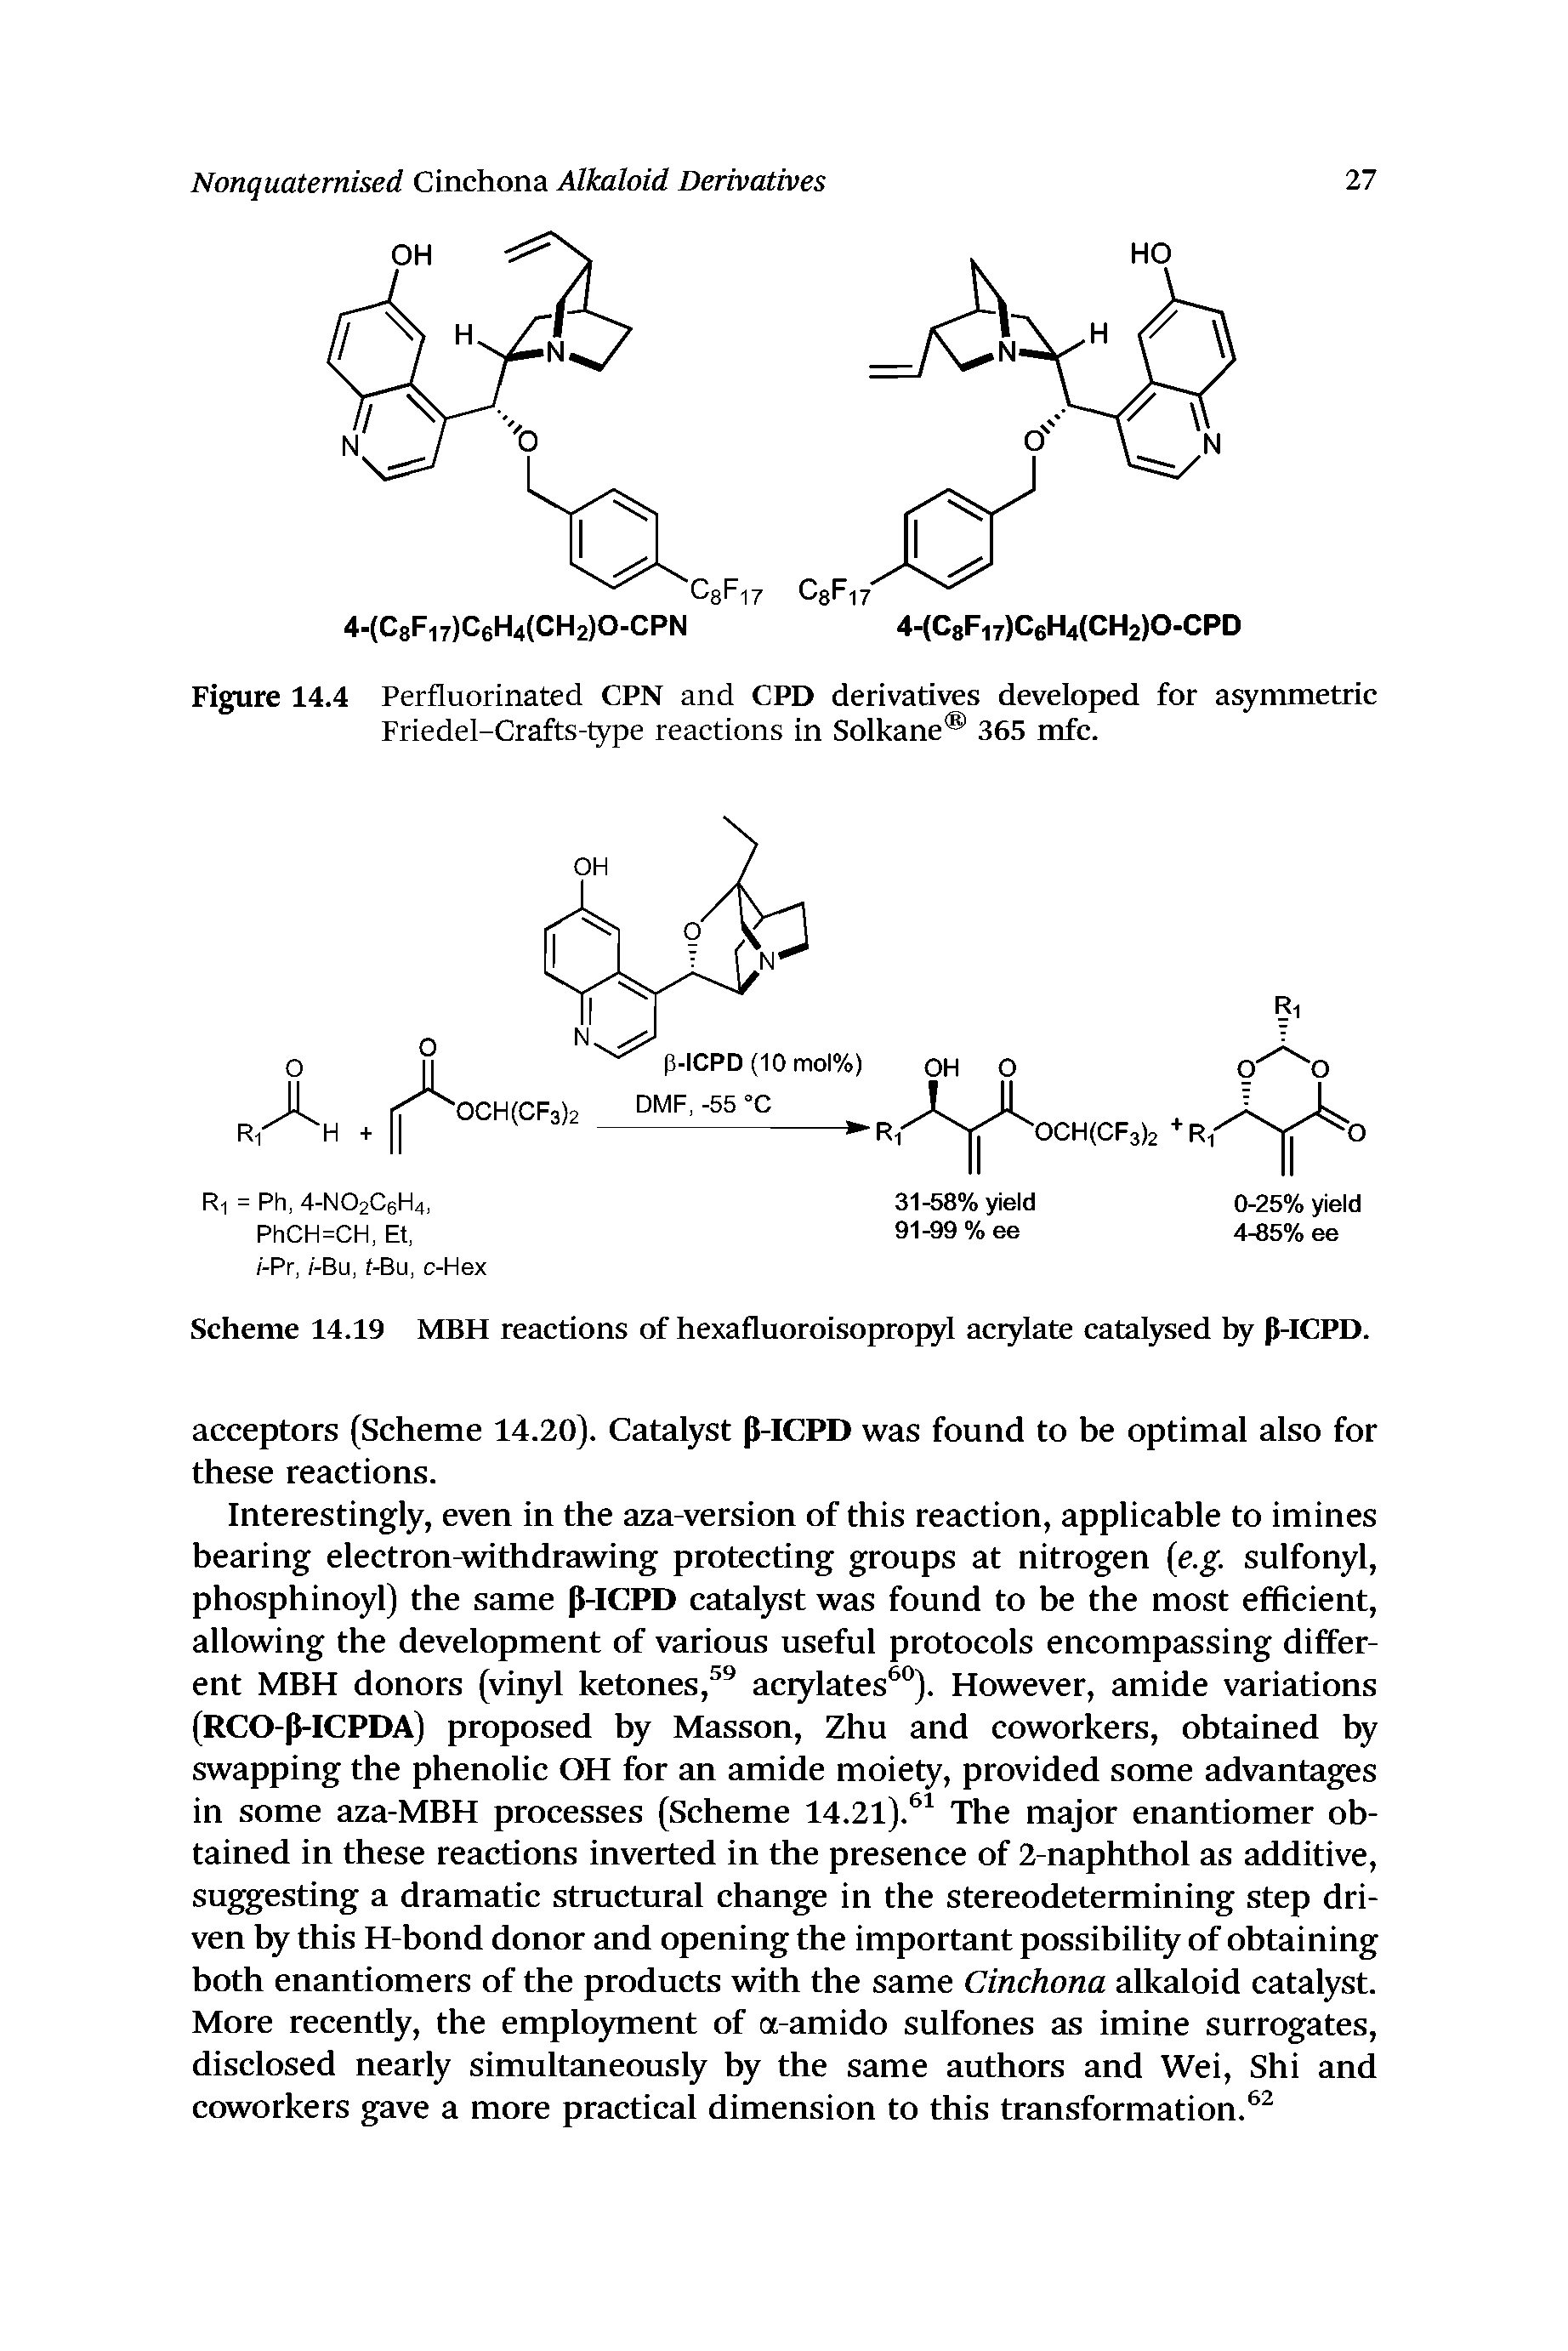 Figure 14.4 Perfluorinated CPN and CPD derivatives developed for asymmetric Friedel-Crafts-type reactions in Solkane 365 mfc.